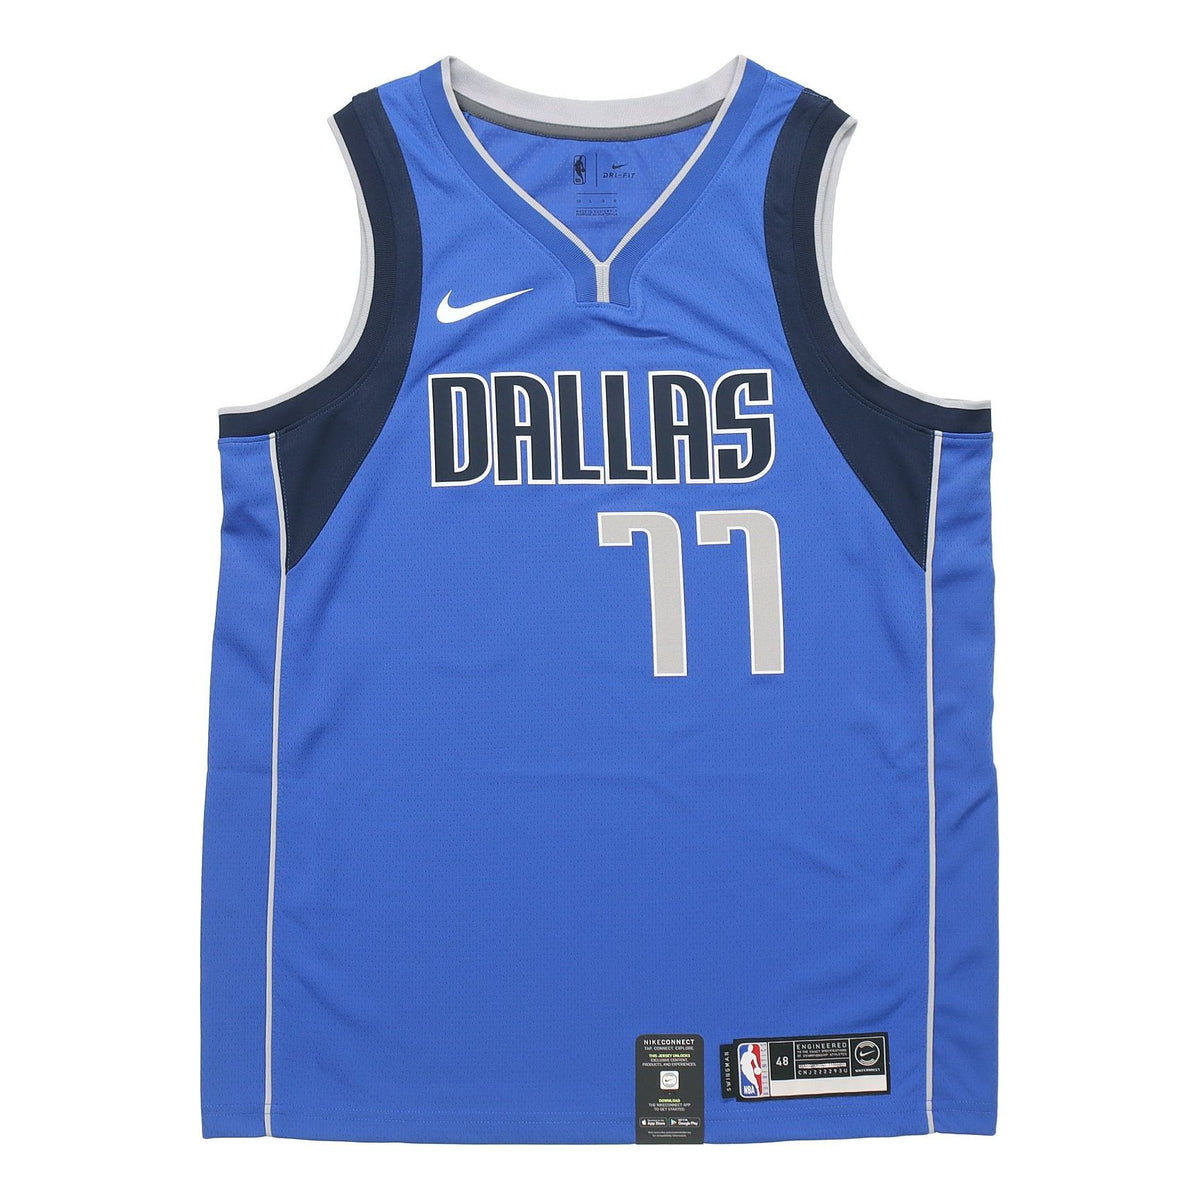 Luka Doncic Rising Stars – Jersey Crate